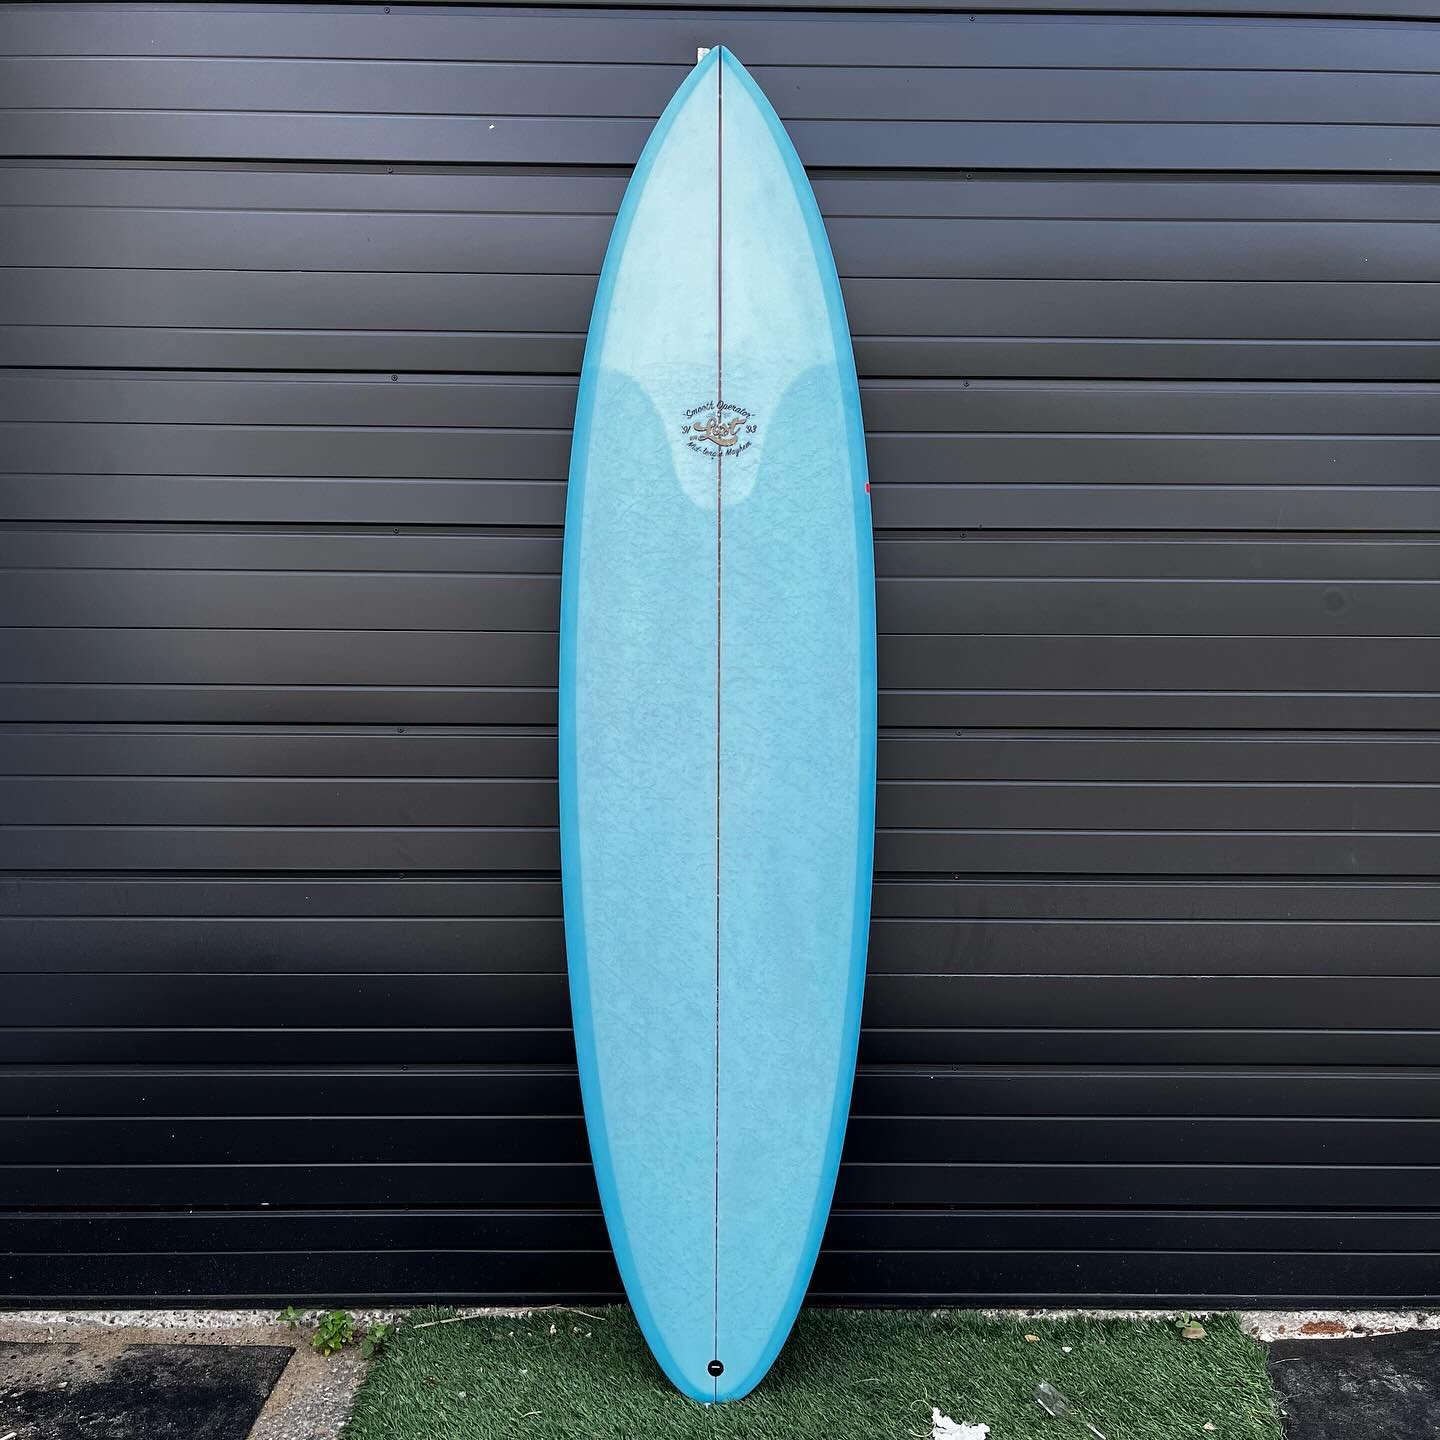 Used @lostsurfboards Smooth Operator
Great condition
7&rsquo;4 x 21.63 x 2.92
-$699-